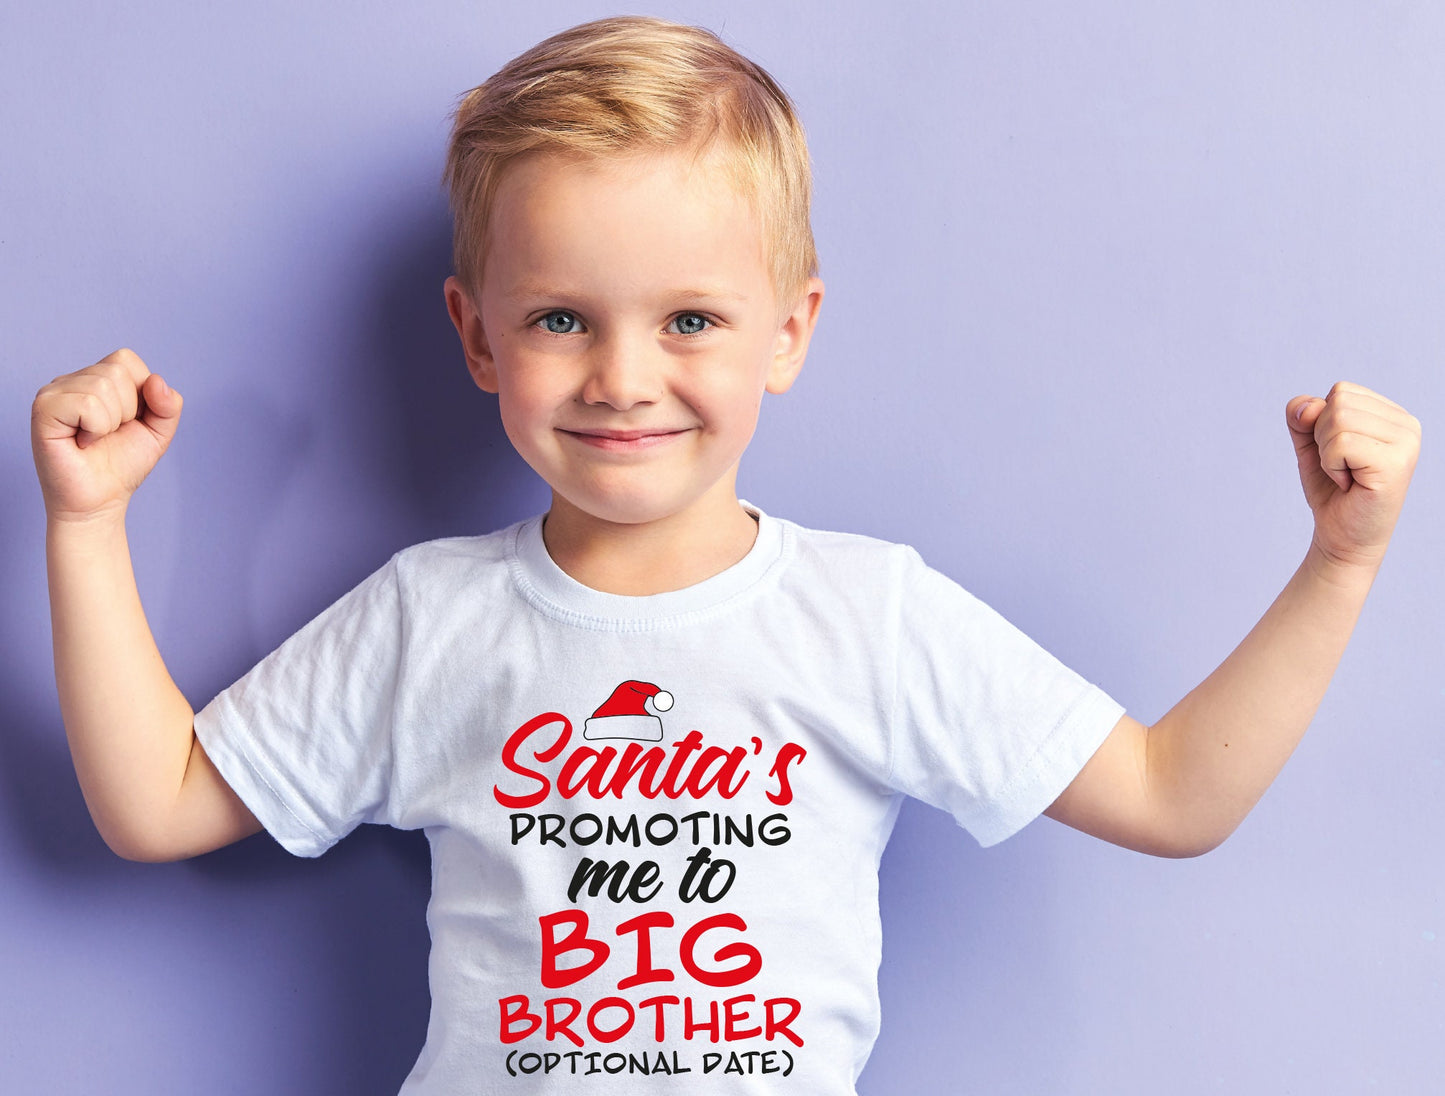 Santa's Promoting Me To Big Brother Kids Christmas T-Shirt with Optional Personalisation | Cool Boy's Xmas Tee